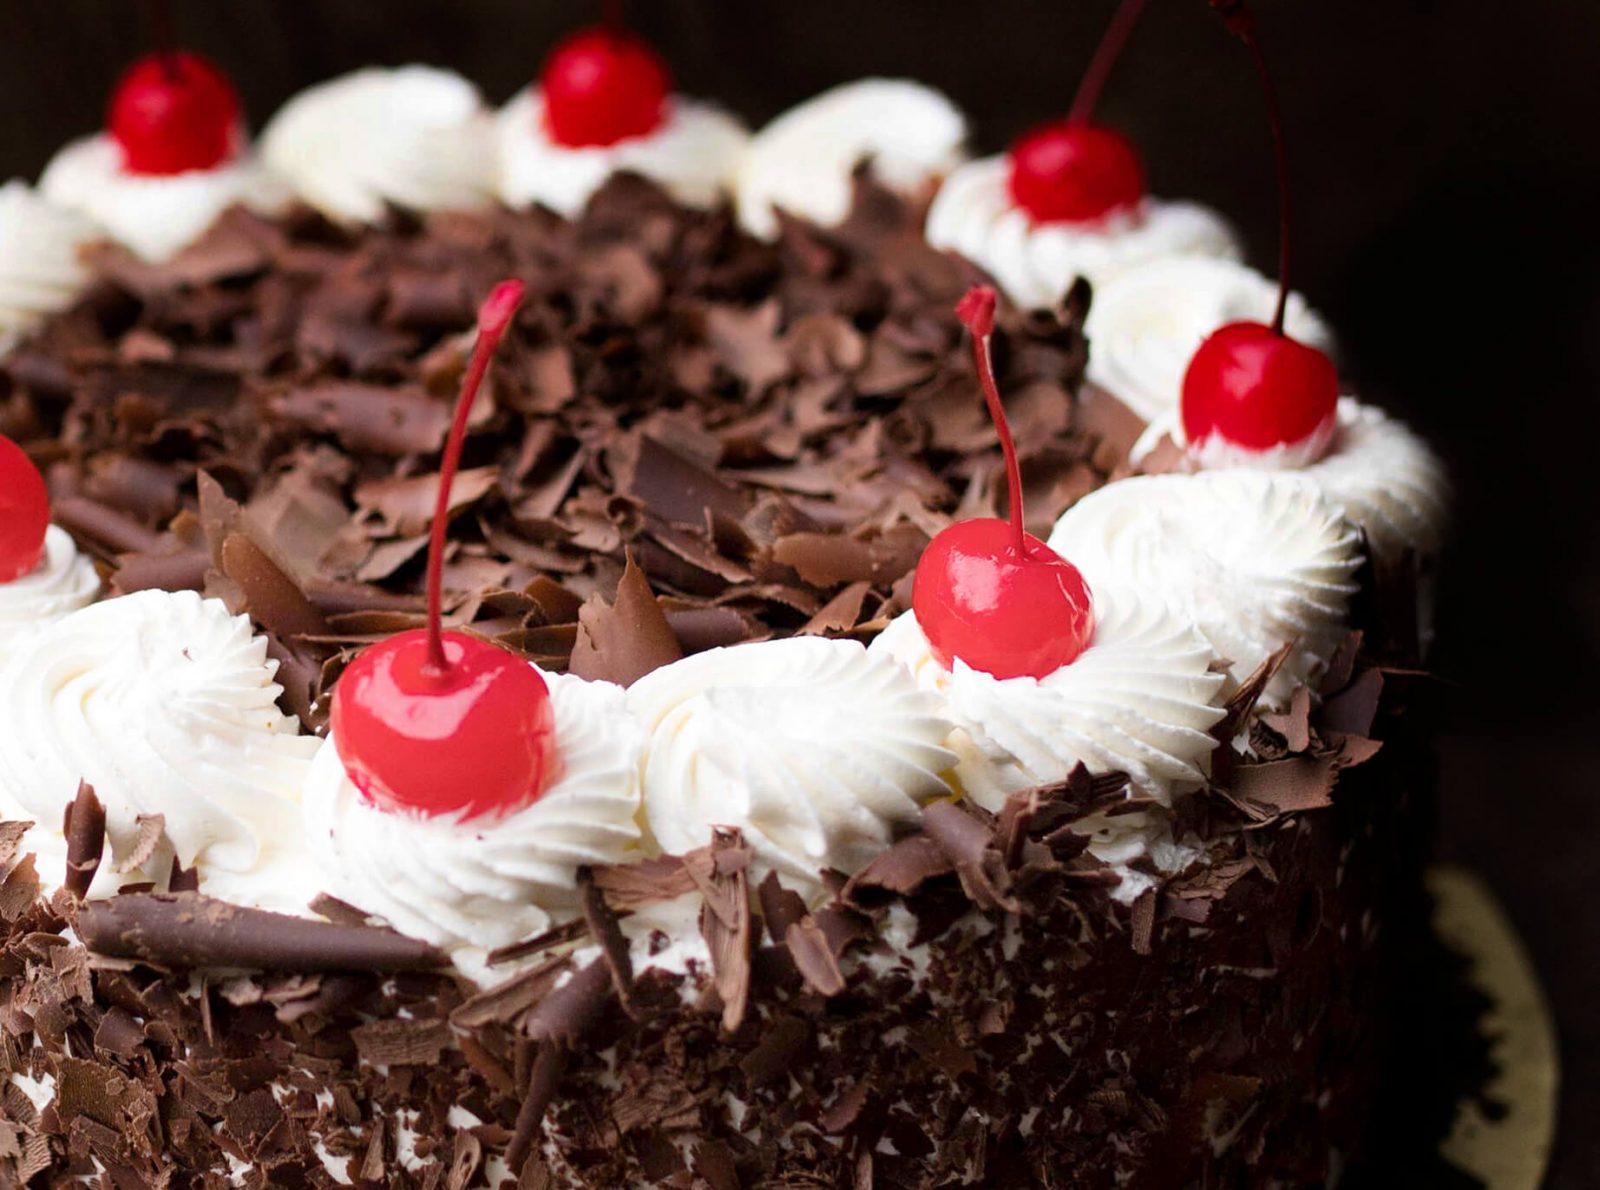 🍫 We Know Whether You’re an Introvert, Extrovert, Or Ambivert Based on How You Rate These Chocolate Desserts Black Forest Cake